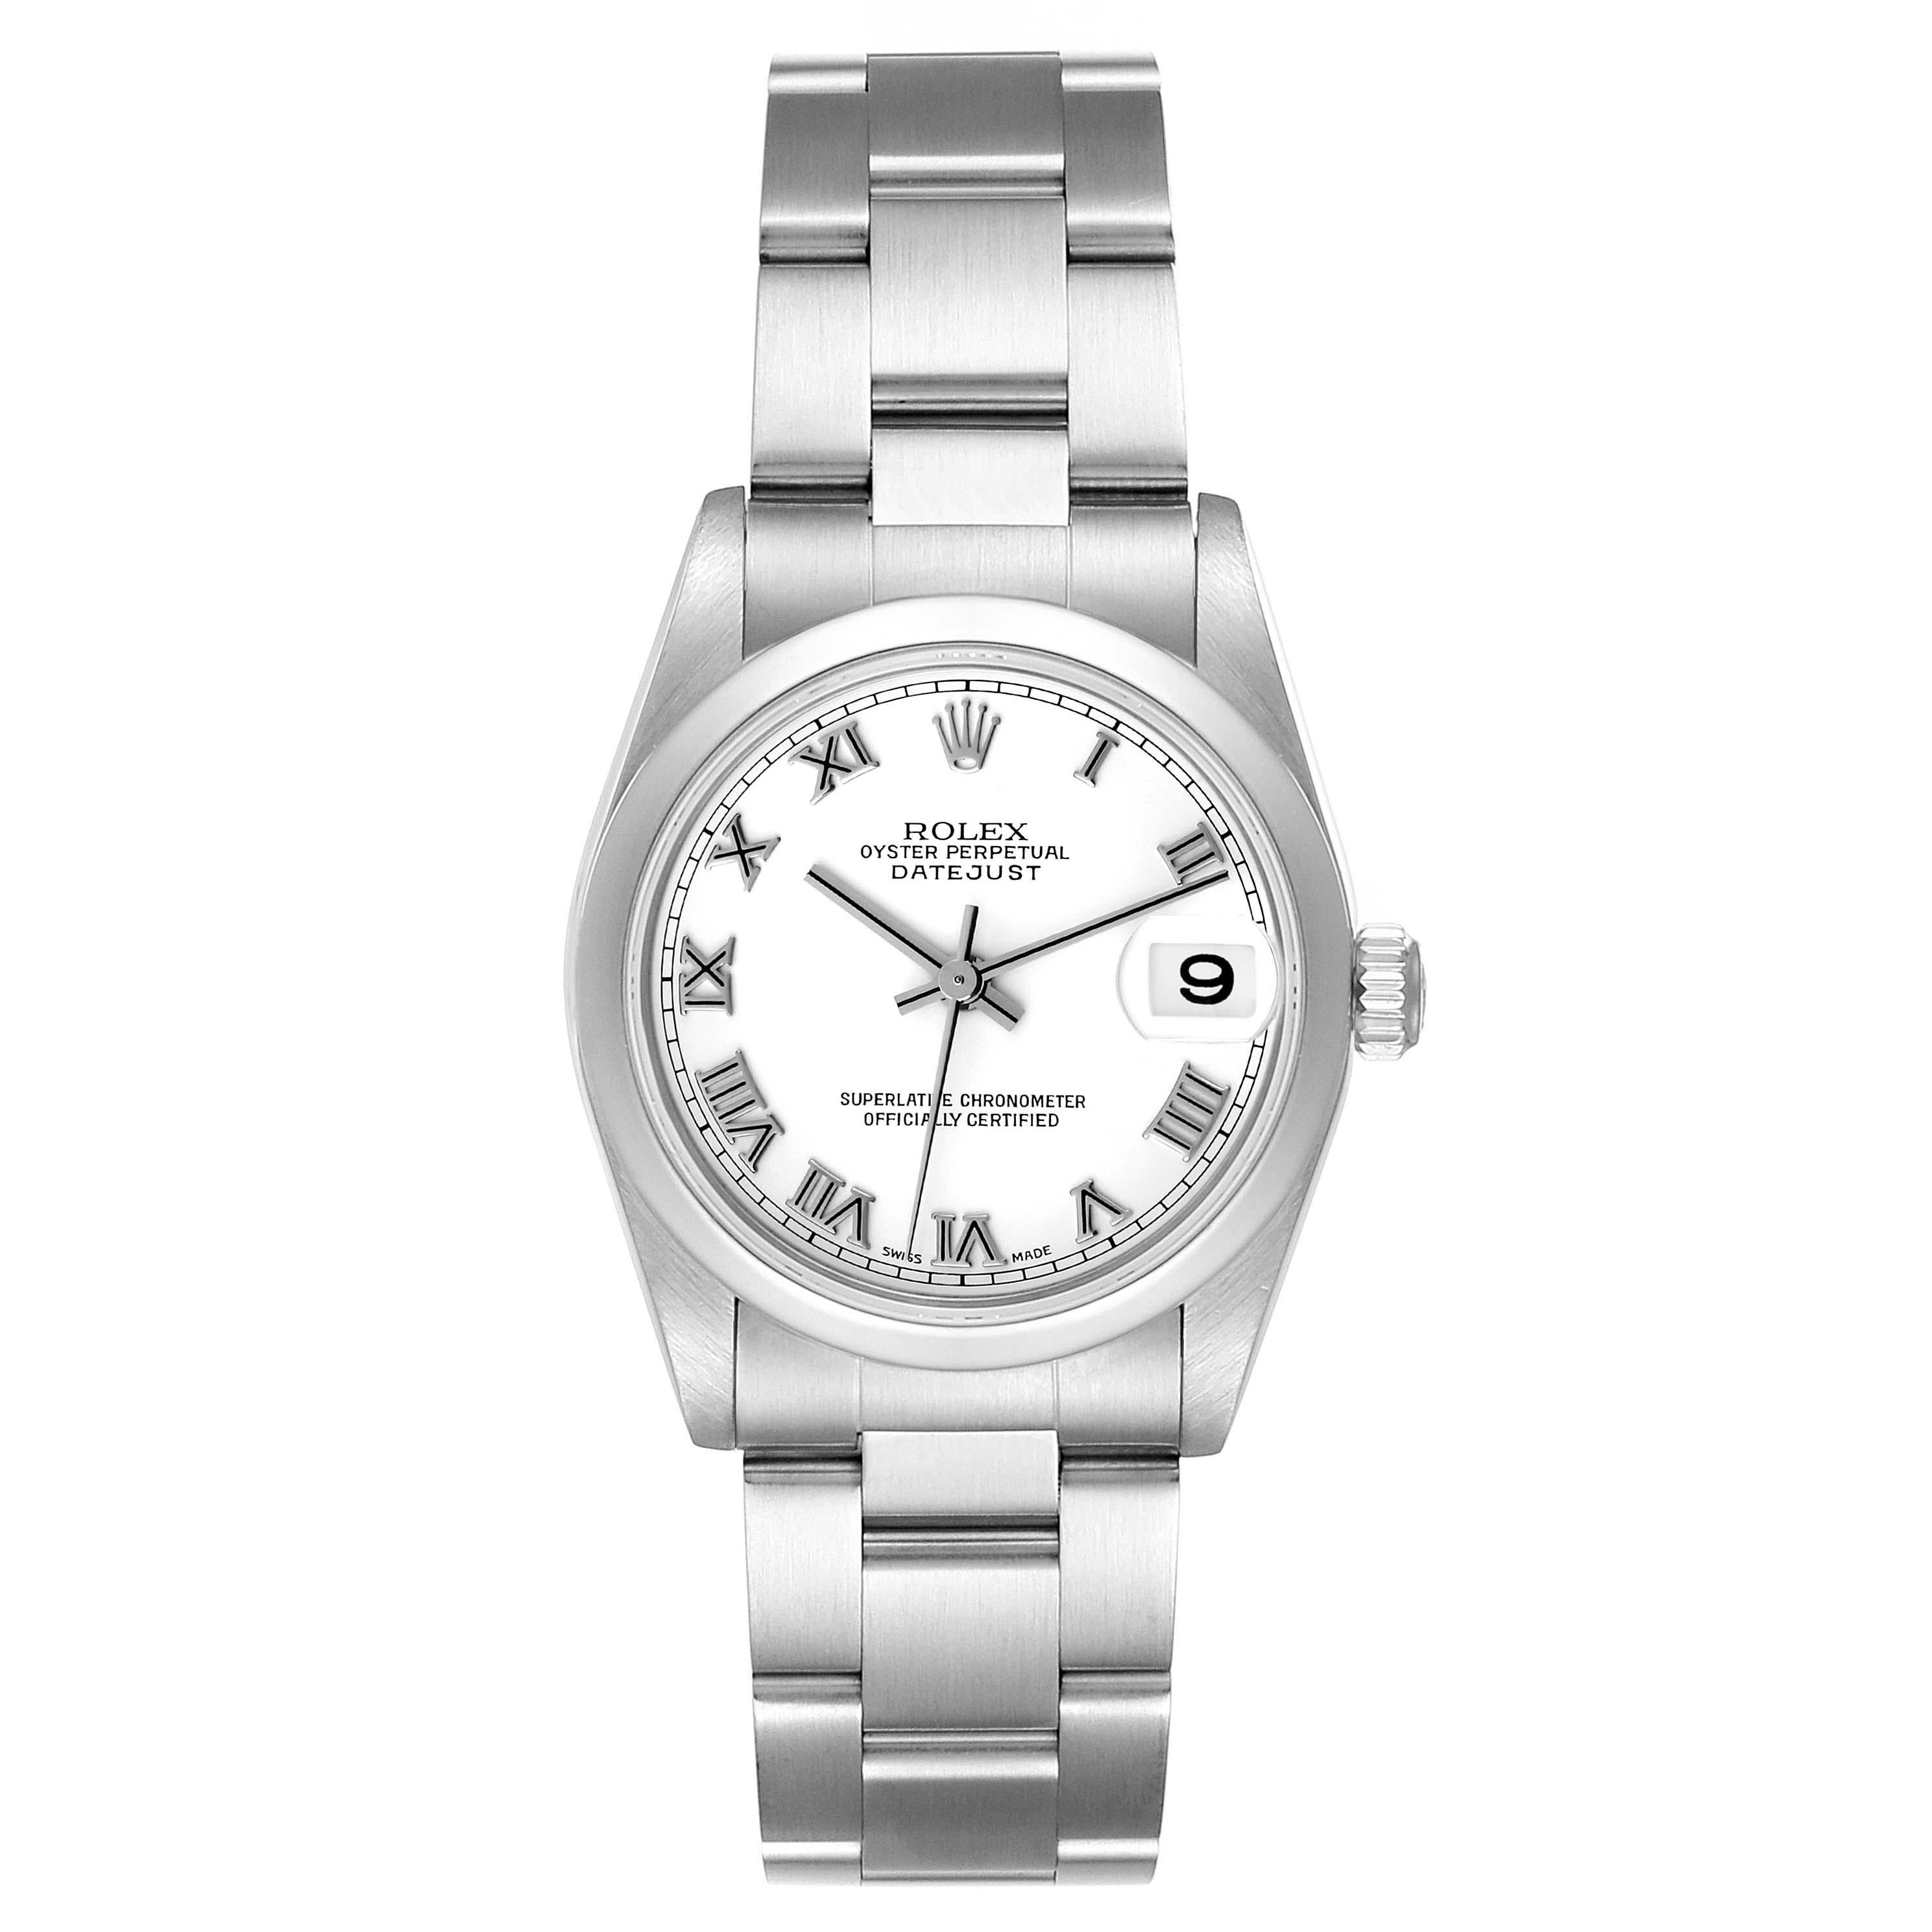 Rolex Datejust 31 Midsize White Roman Dial Steel Ladies Watch 78240 Box Papers. Officially certified chronometer self-winding movement. Stainless steel oyster case 31 mm in diameter. Rolex logo on a crown. Stainless steel smooth domed bezel. Scratch